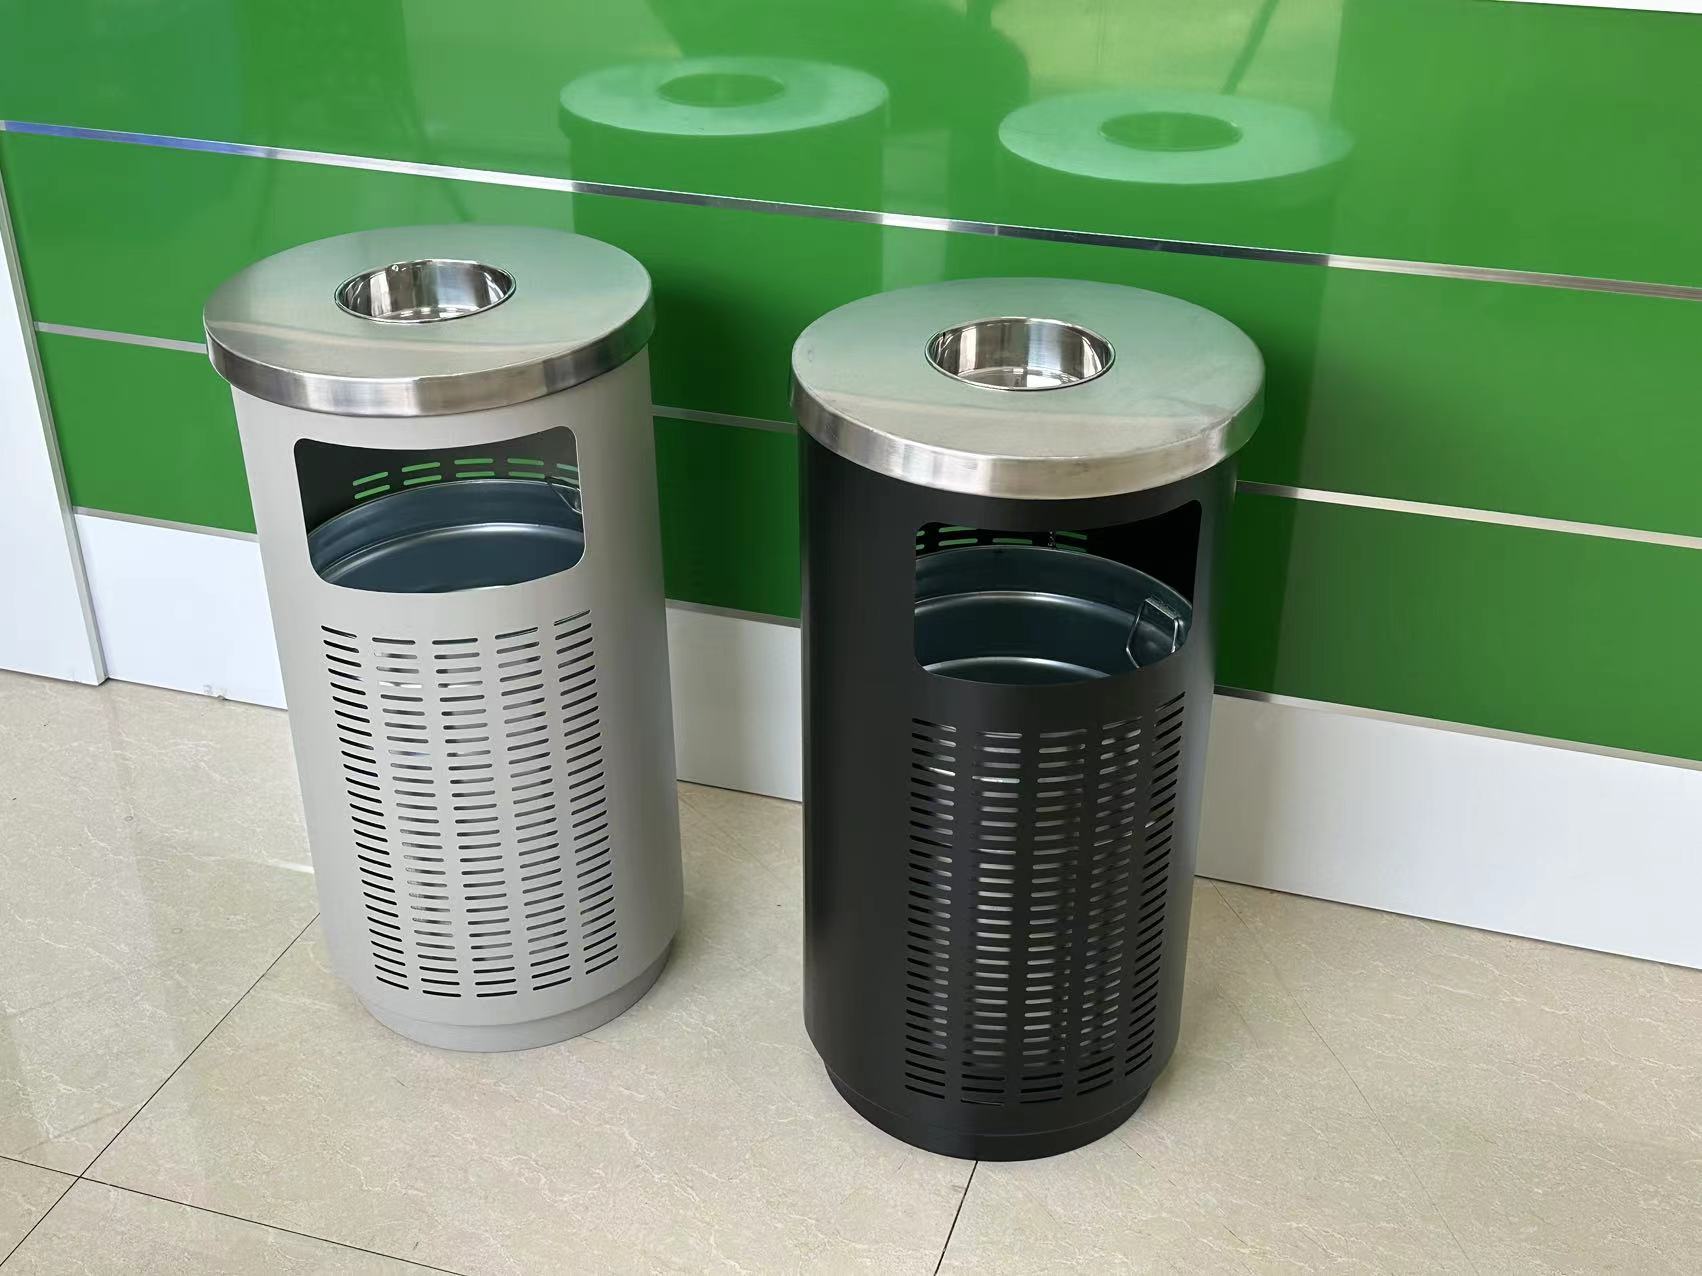 Roundness Waste Bin with Ashtray for Outdoor HW-74